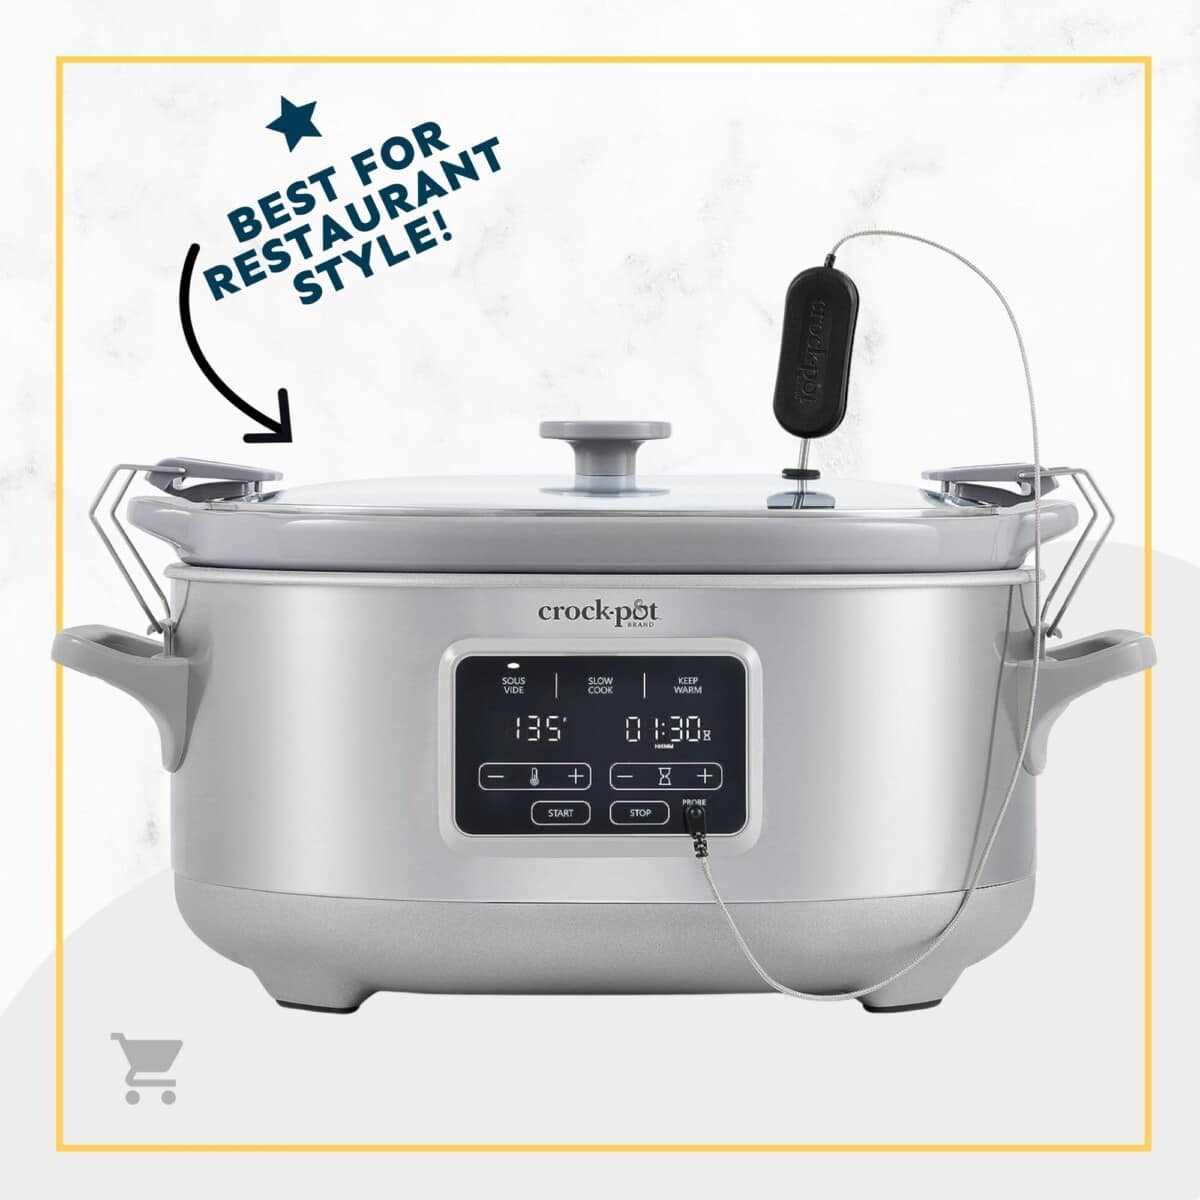 A stainless steel crock pot with the words best for restaurant style.